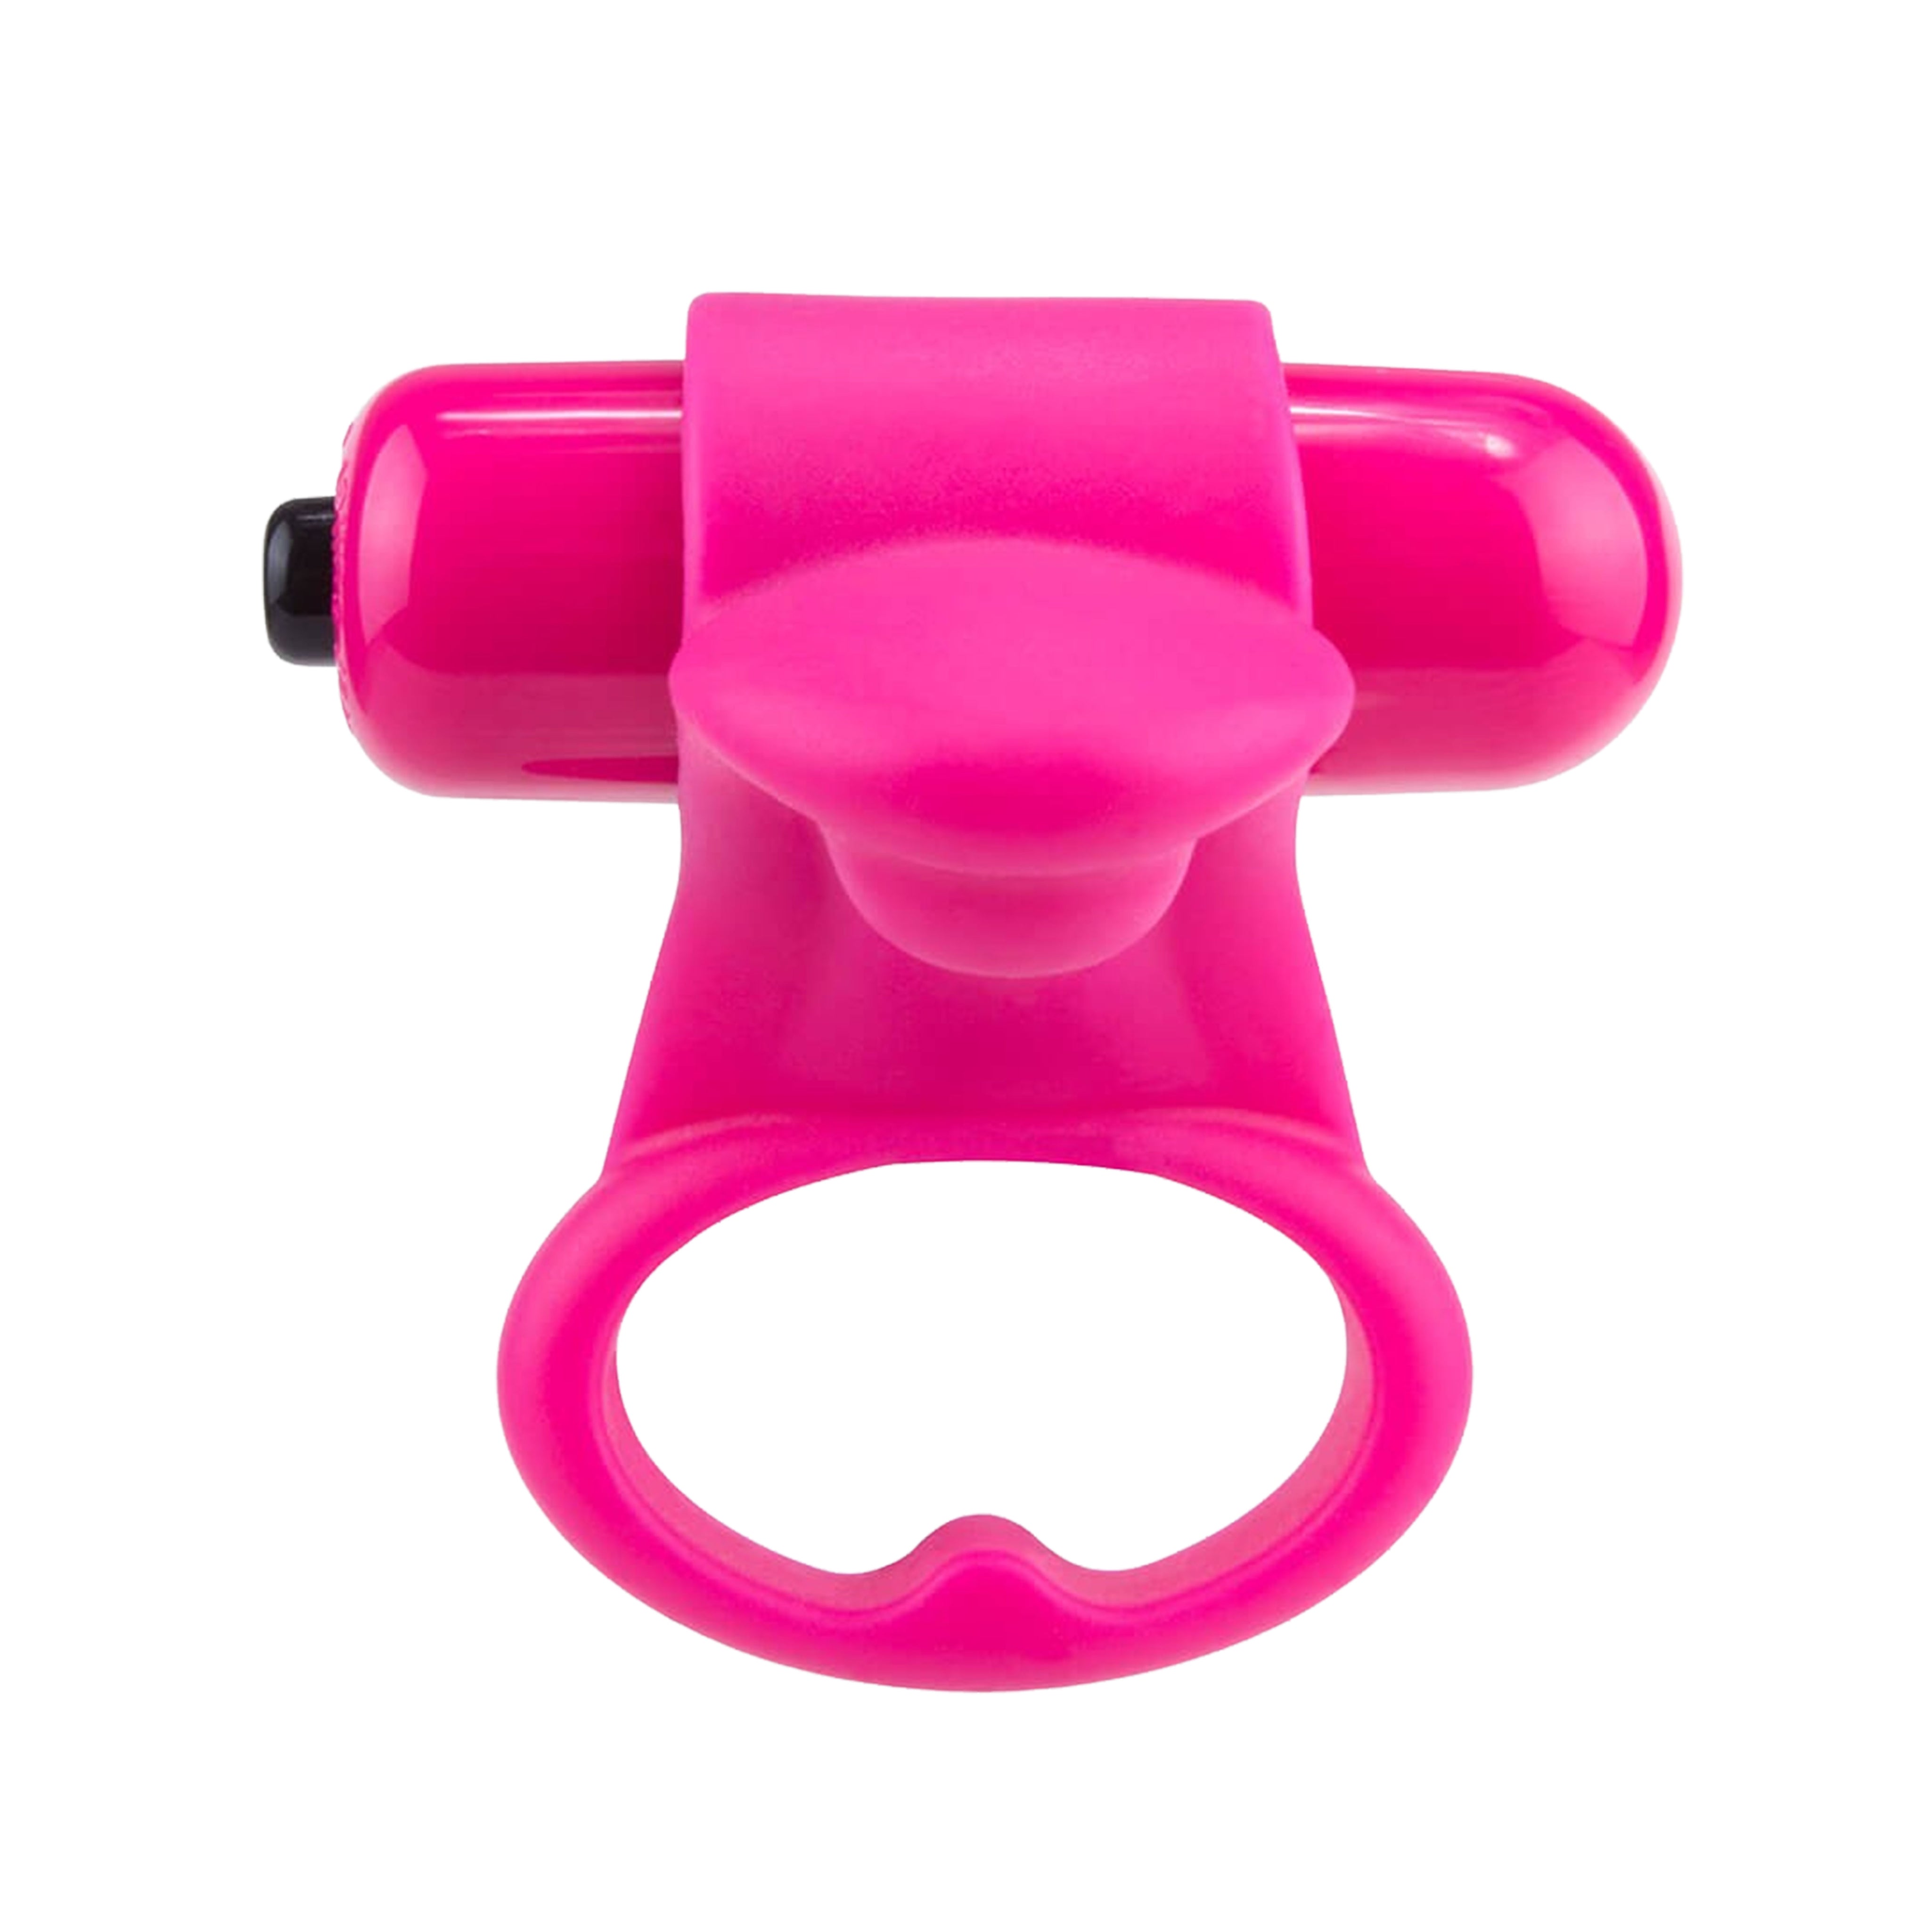 You Turn 2 Finger Vibe Silicone Ring Waterproof Strawberry